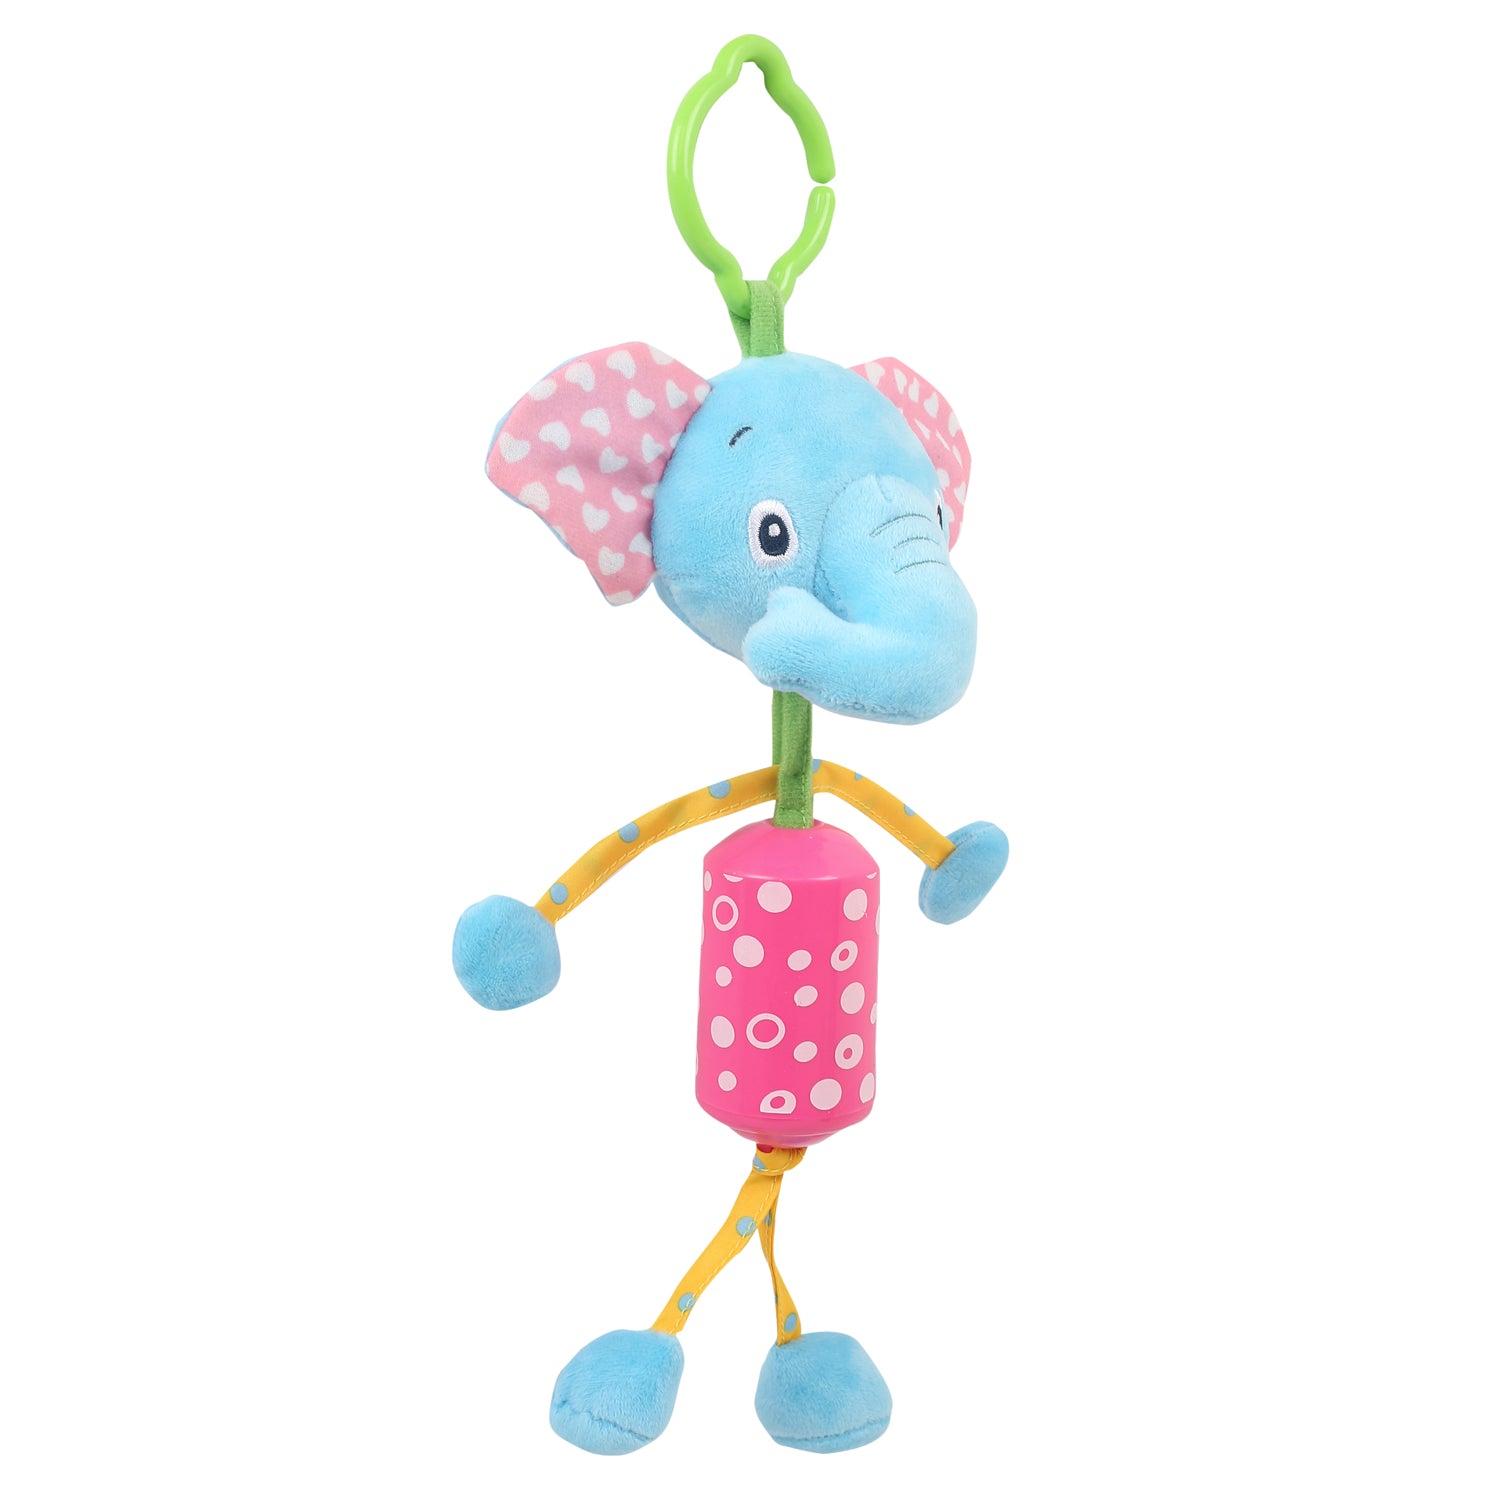 Elephant Blue Hanging Musical Toy / Wind Chime Soft Rattle